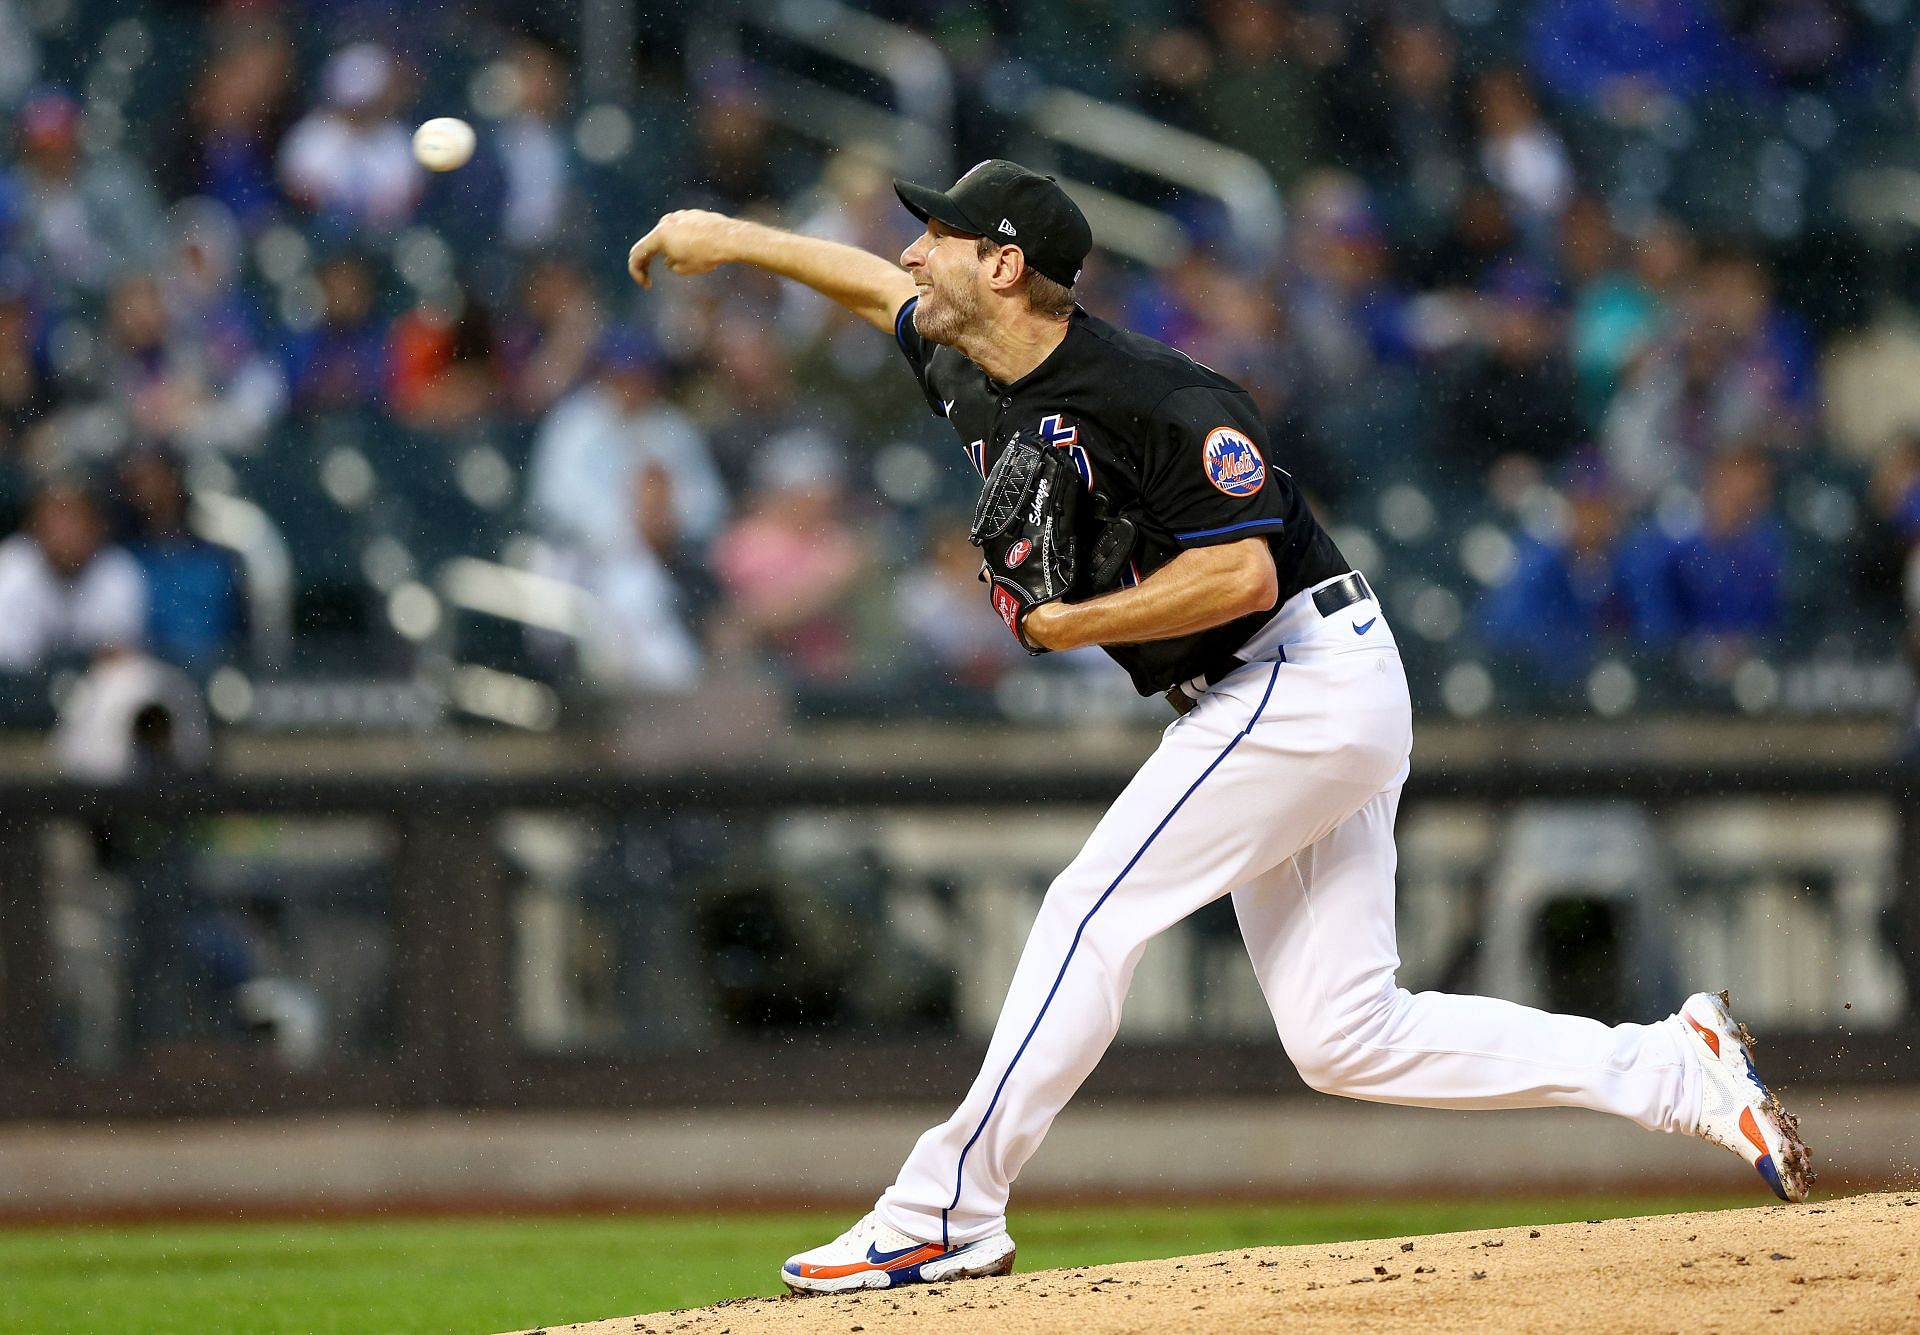 Max Scherzer v the Seattle Mariners on May 13th